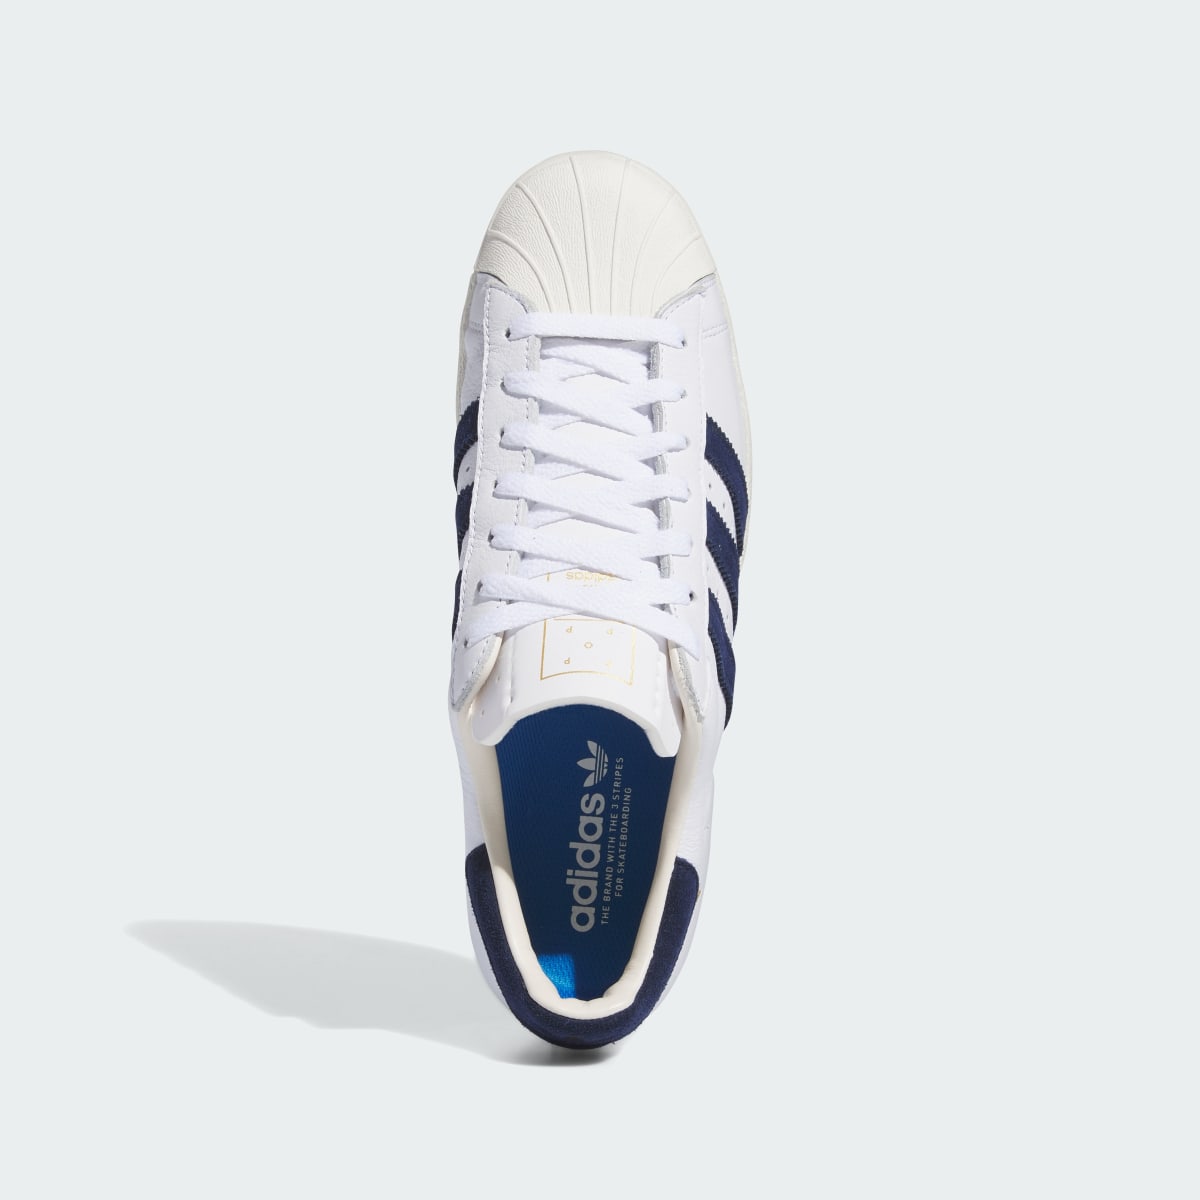 Adidas Pop Trading Co Superstar ADV Trainers. 4